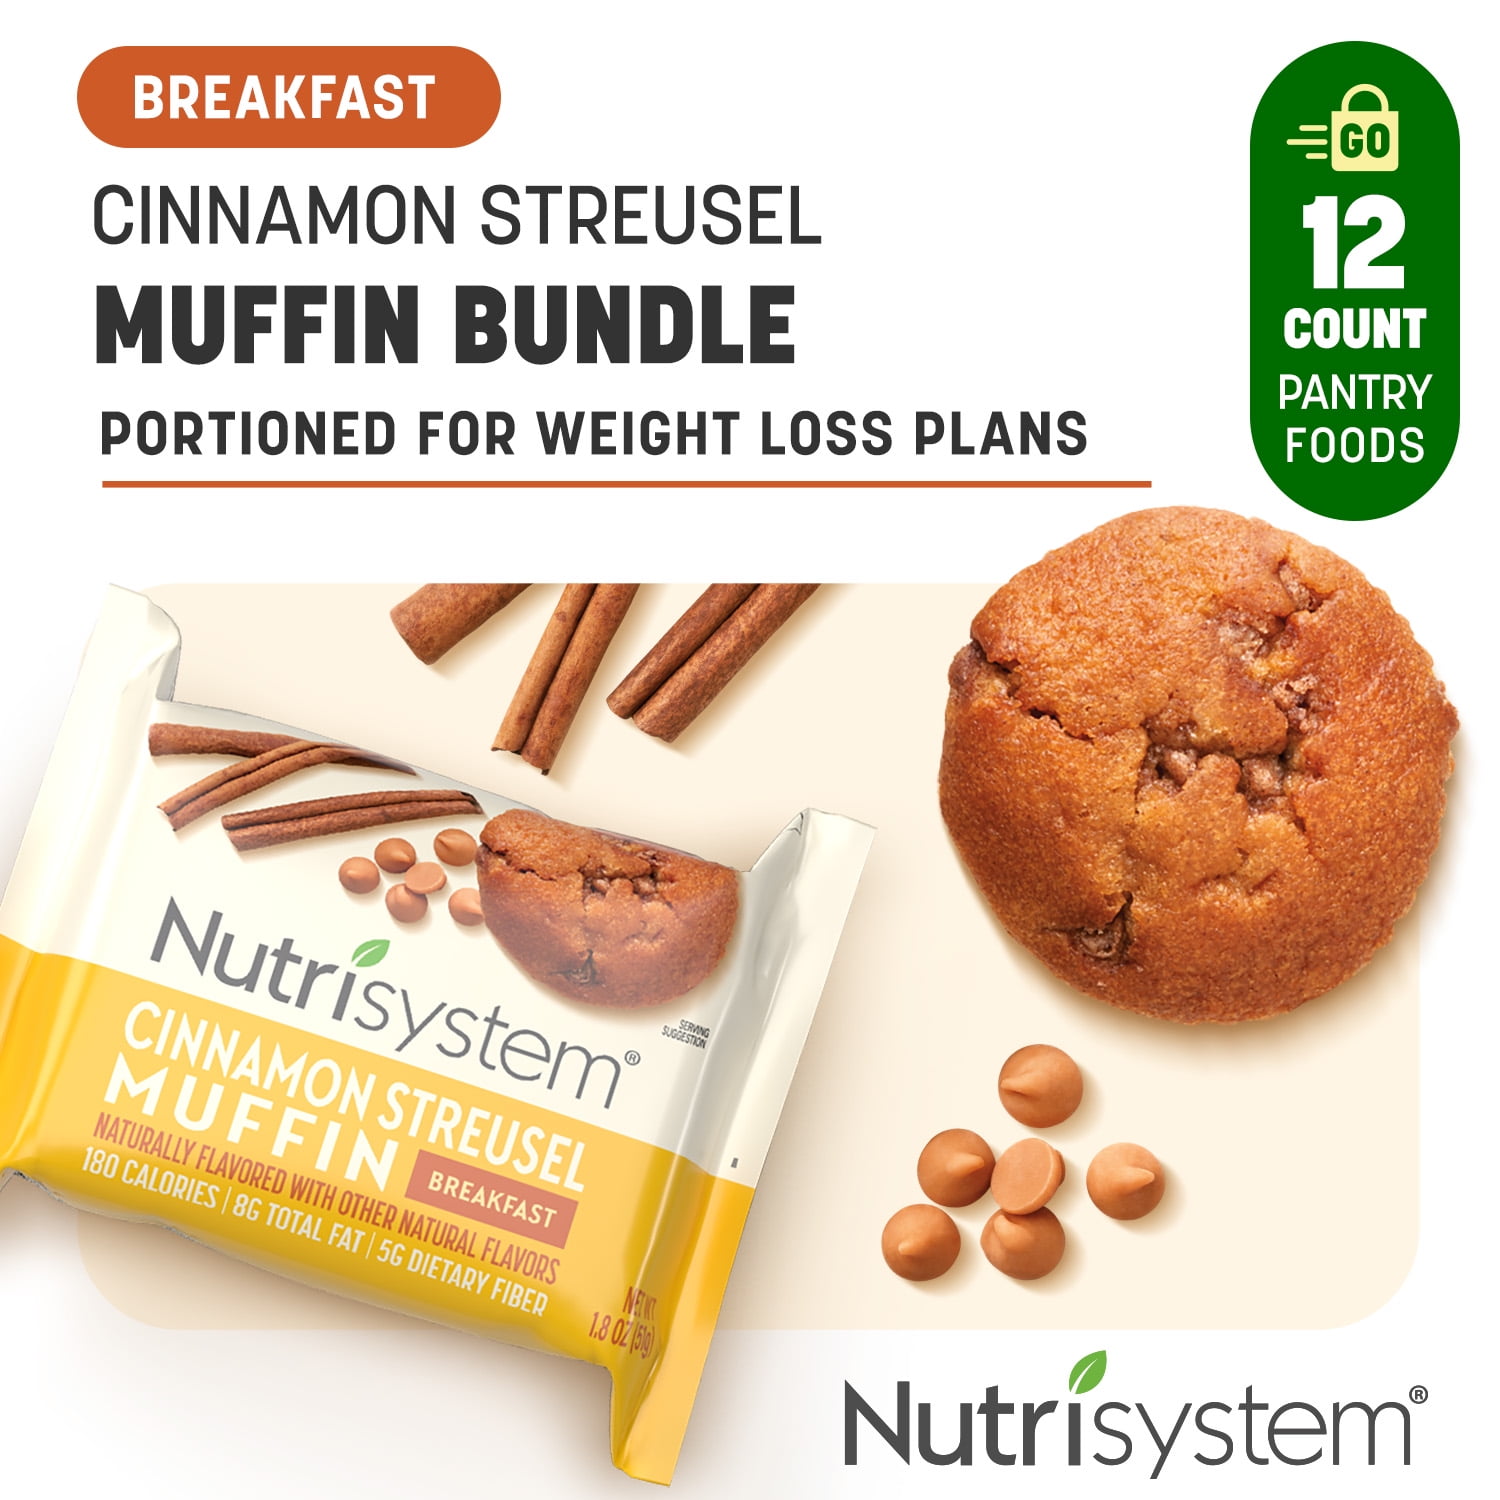 Nutrisystem® Body Select™ Cinnamon Streusel Breakfast Muffins, 12ct, Delicious Pastries to Start Your Day Off Strong